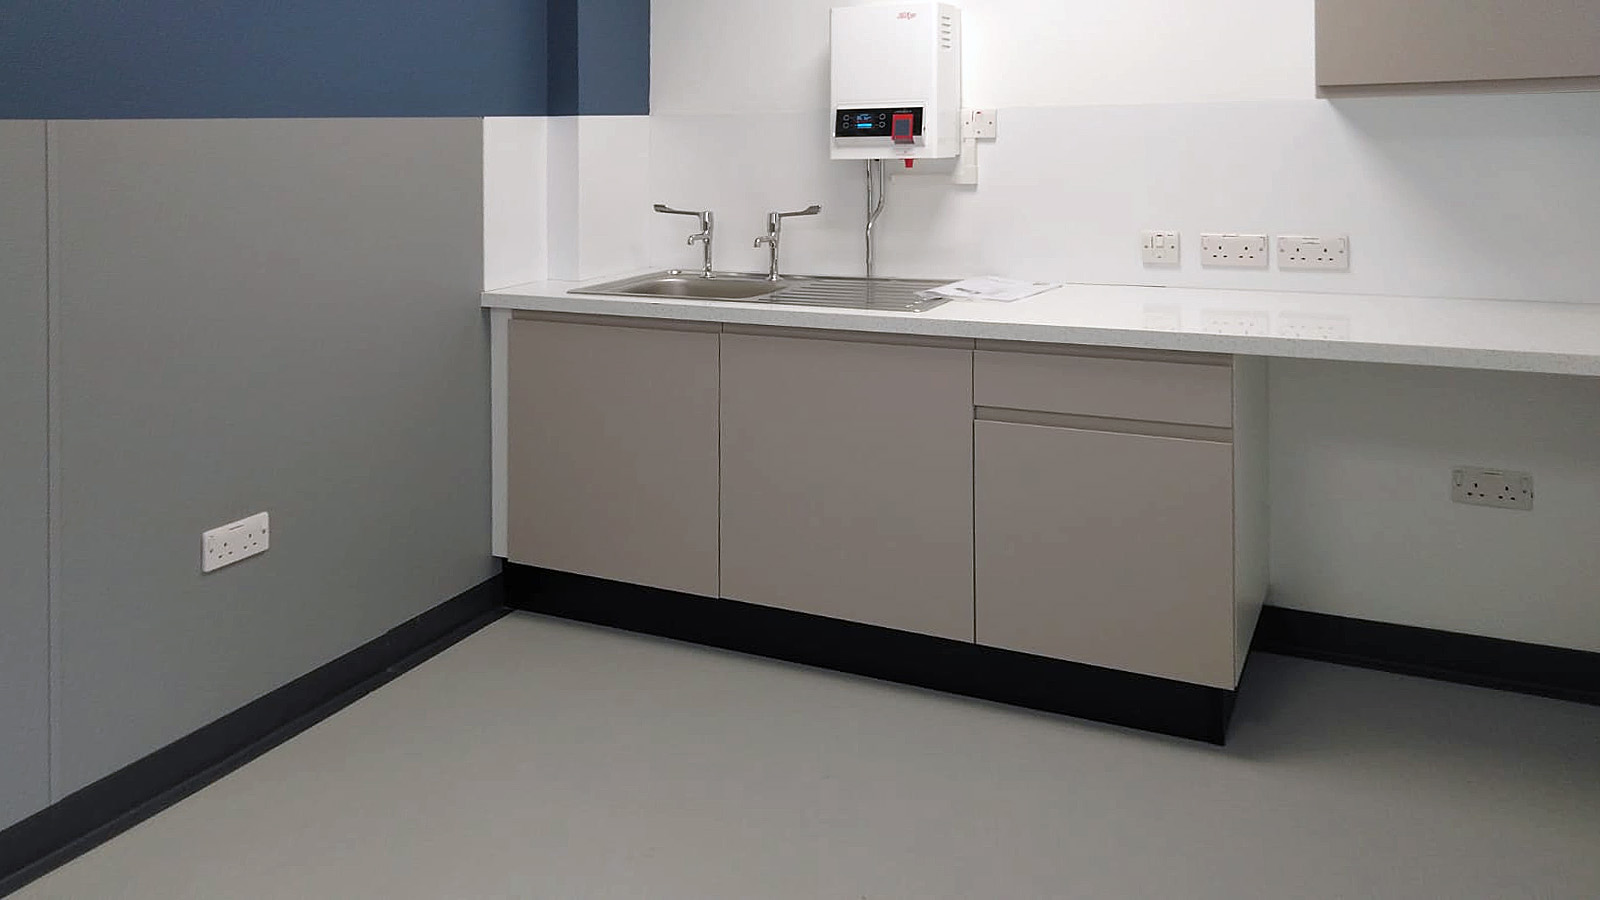 Antimicrobial Wall Protection in Kitchen area